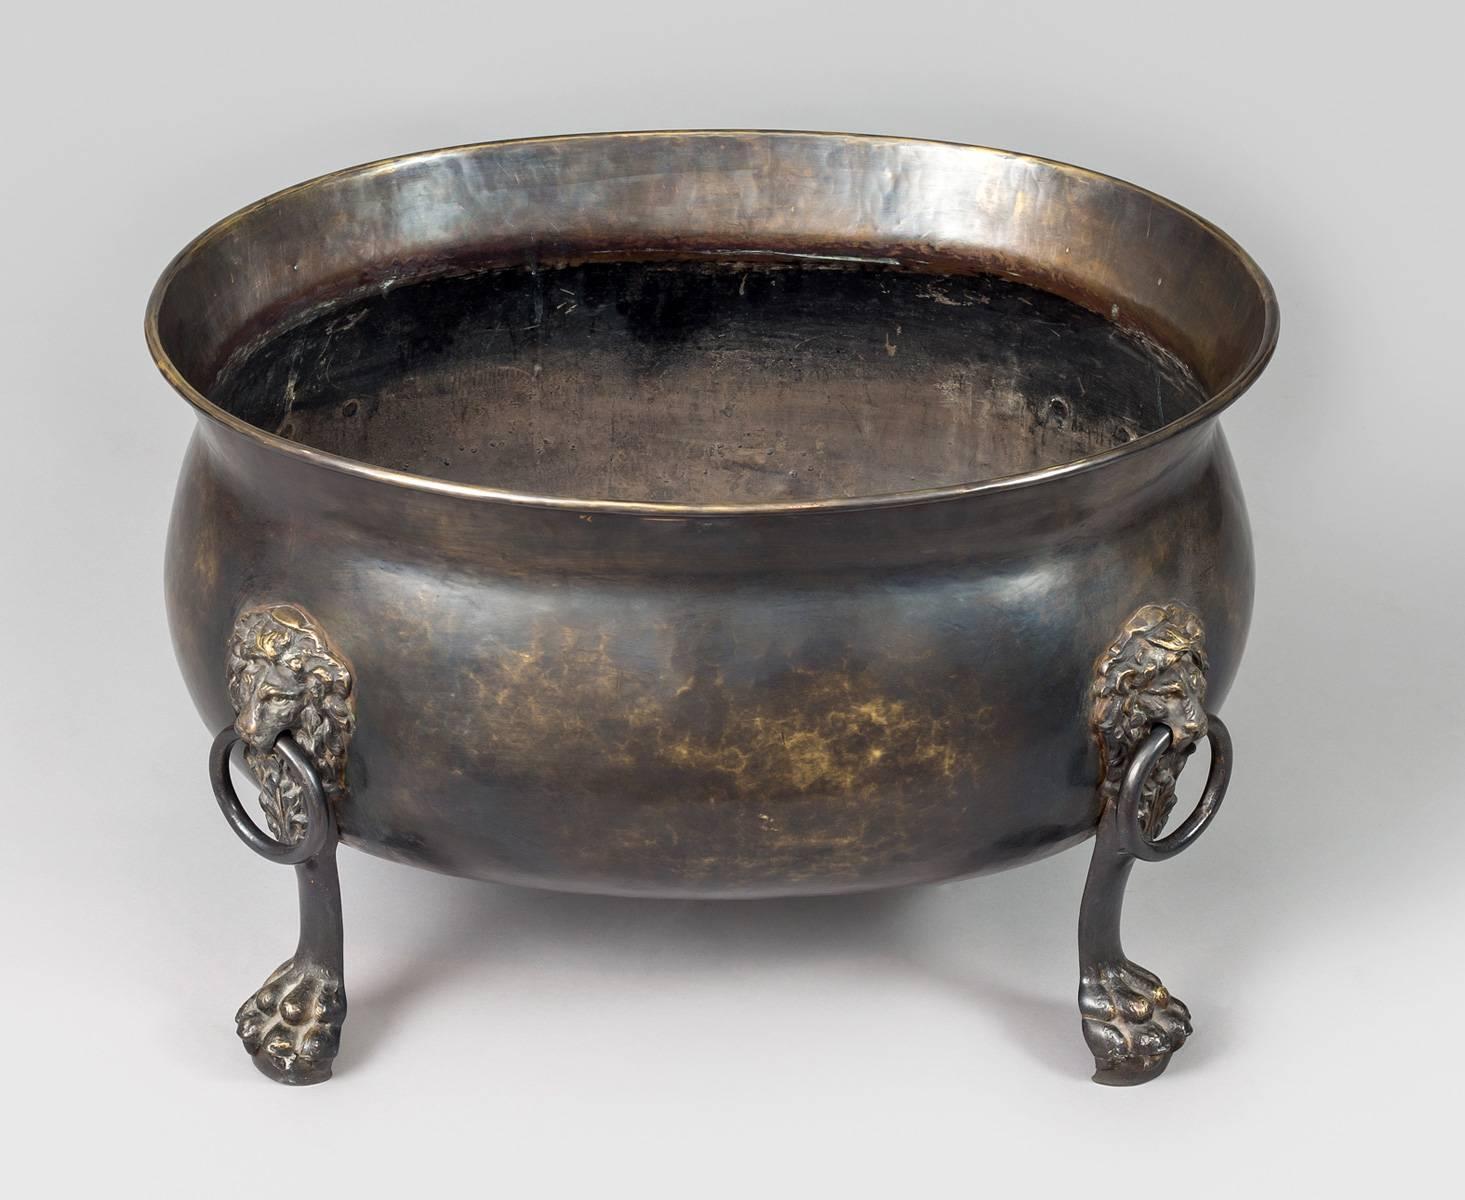 Oval Patinated Brass Wine Cooler In Excellent Condition For Sale In Sheffield, MA